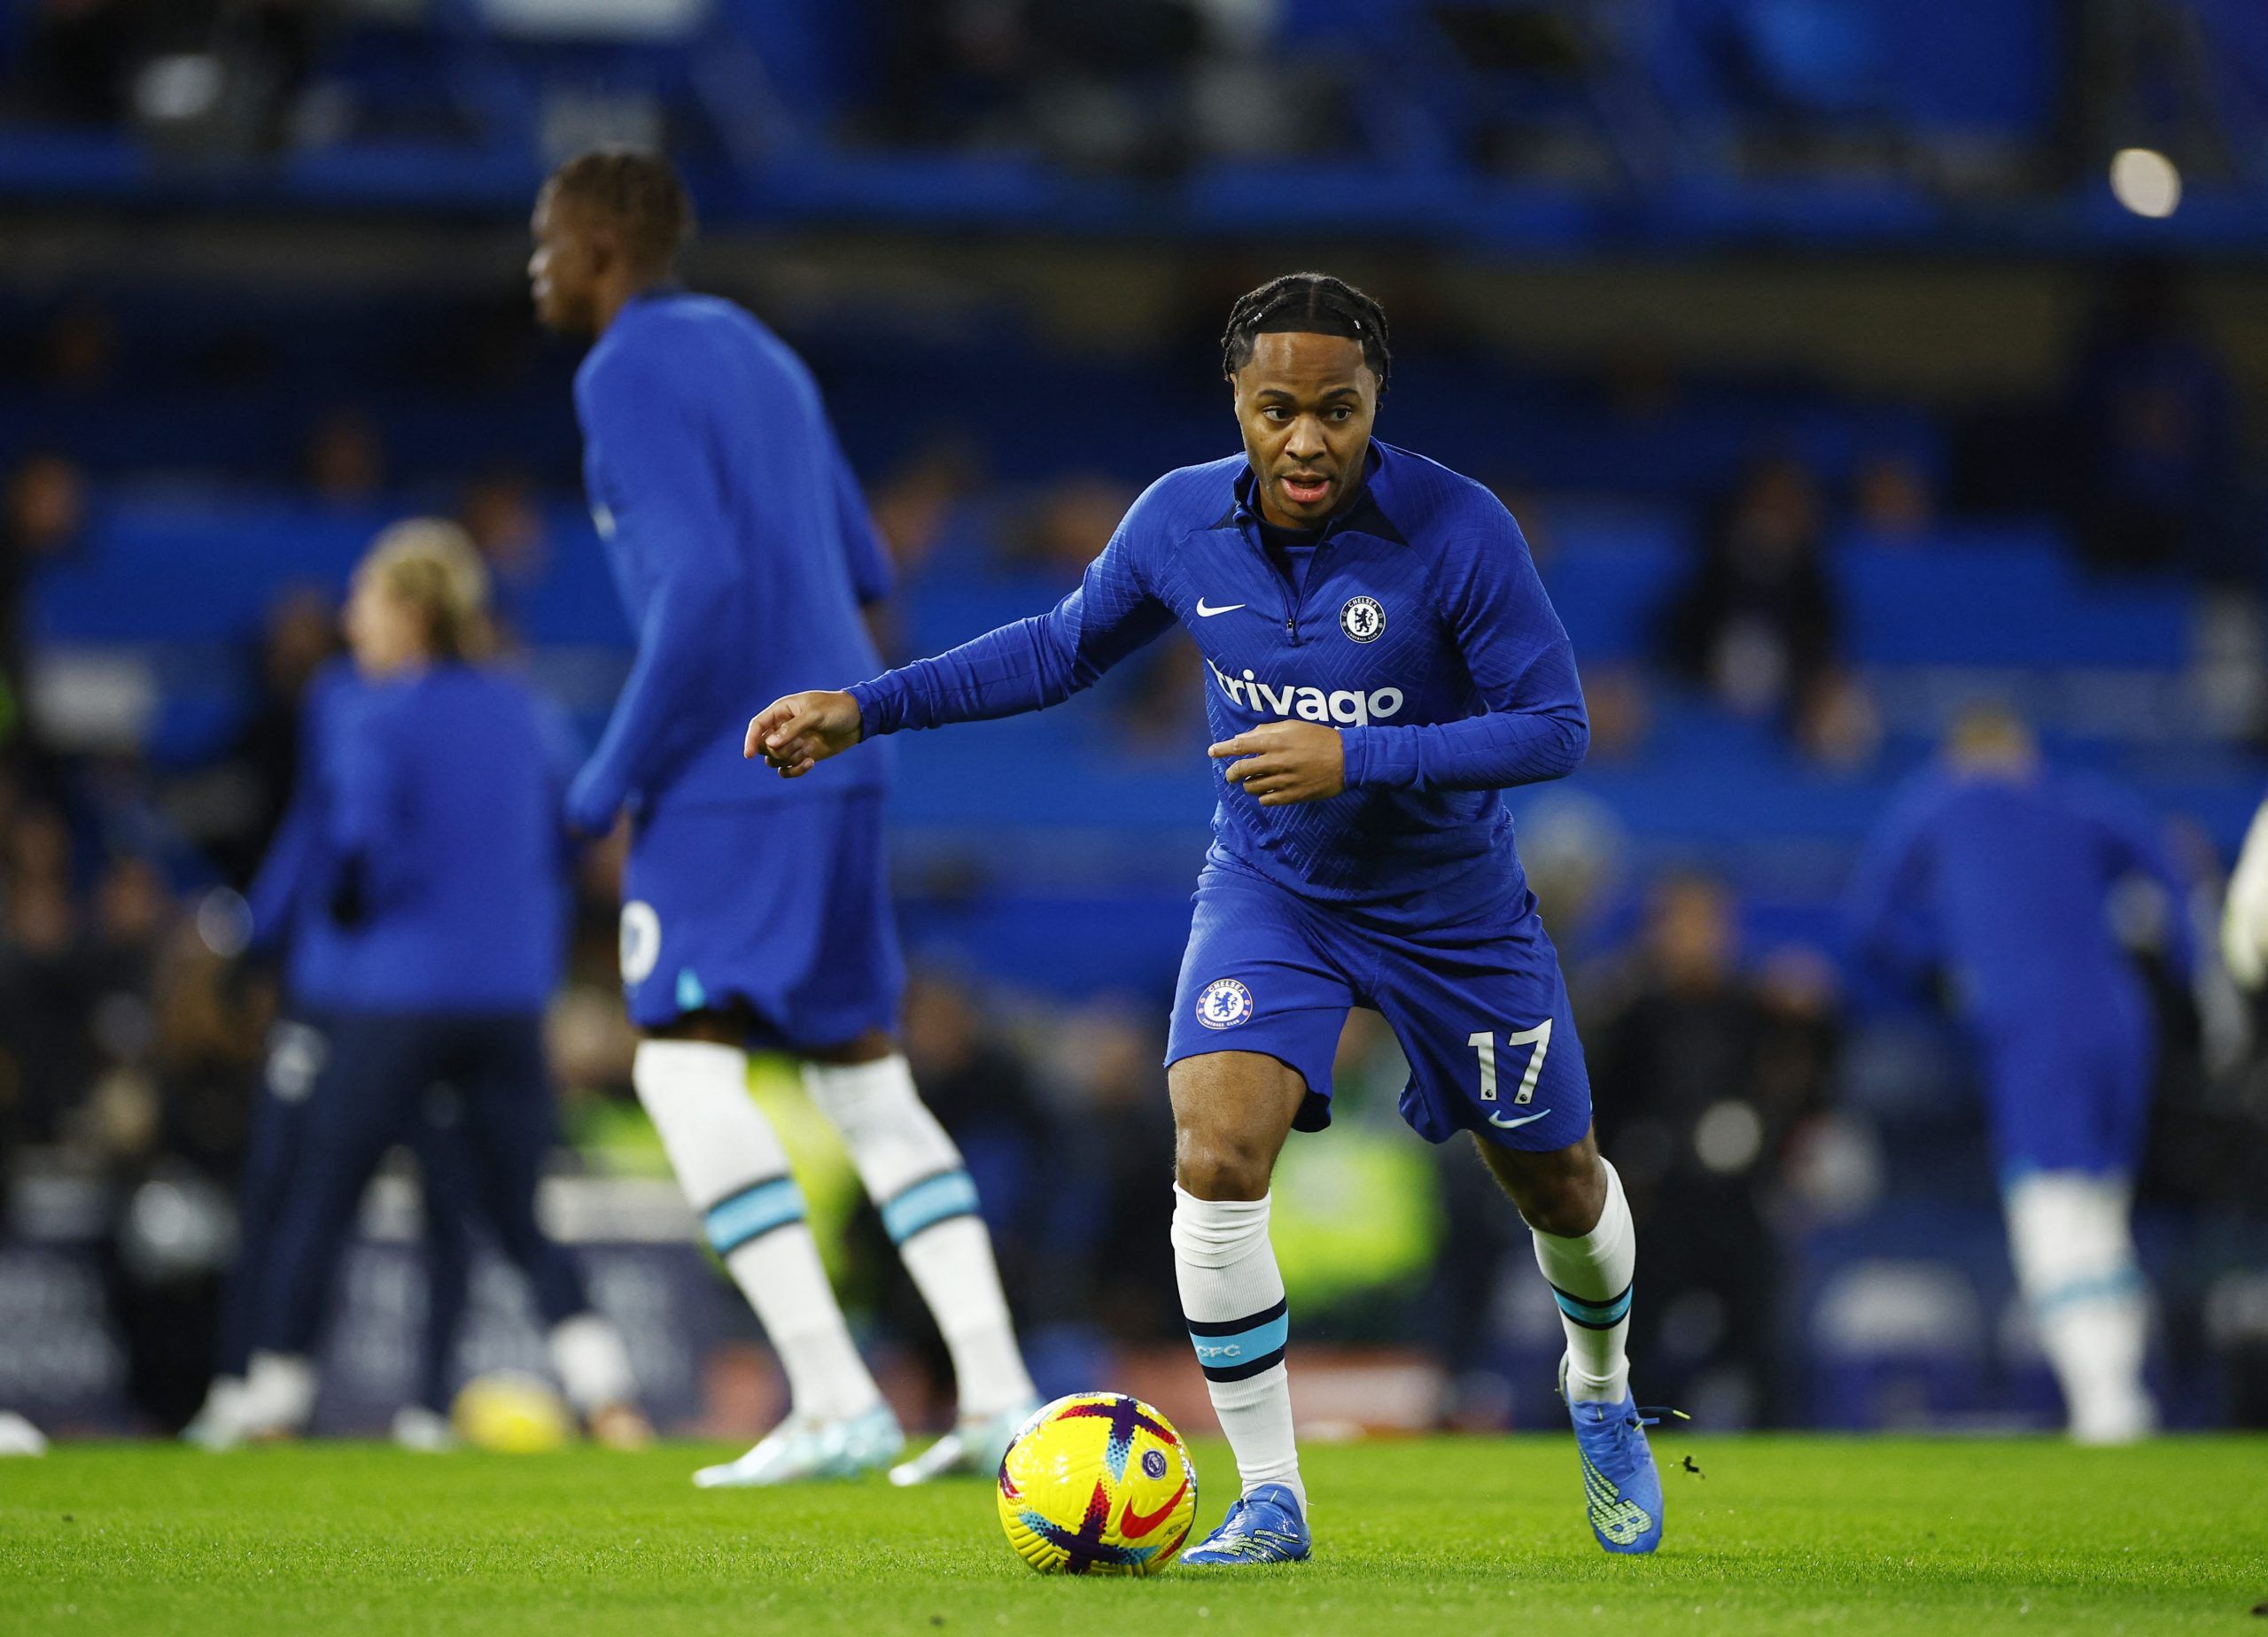 Soccer Football - Premier League - Chelsea v Manchester City - Stamford Bridge, London, Britain - January 5, 2023 Chelsea's Raheem Sterling during the warm up before the match Action Images via Reuters/John Sibley EDITORIAL USE ONLY. No use with unauthorized audio, video, data, fixture lists, club/league logos or 'live' services. Online in-match use limited to 75 images, no video emulation. No use in betting, games or single club /league/player publications.  Please contact your account represen